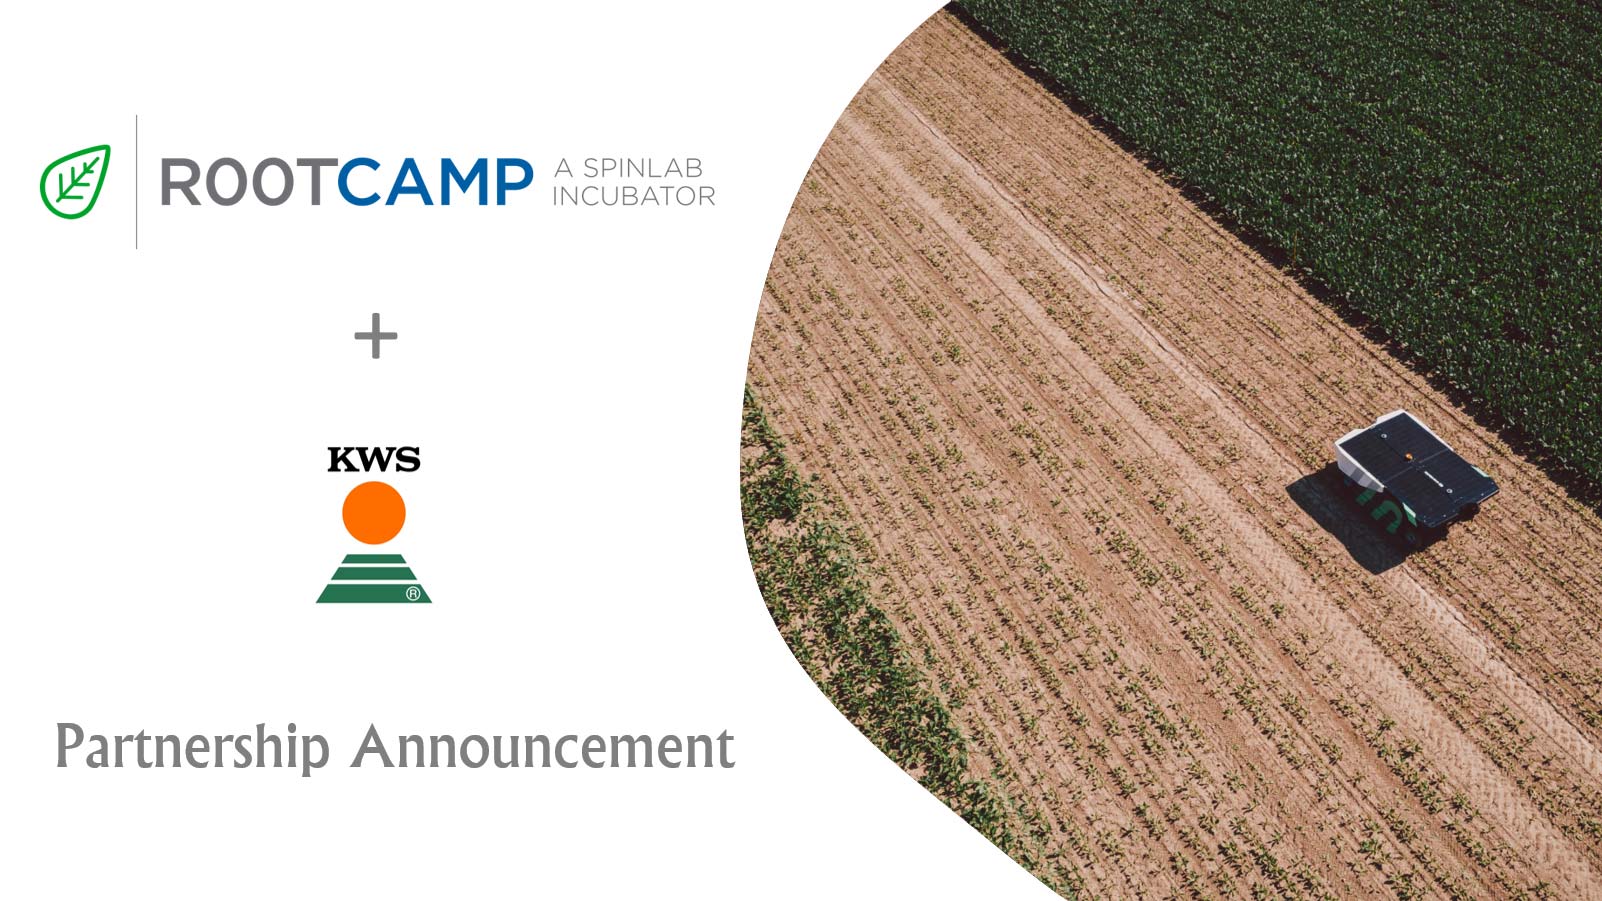 RootCamp gains KWS as new corporate partner 